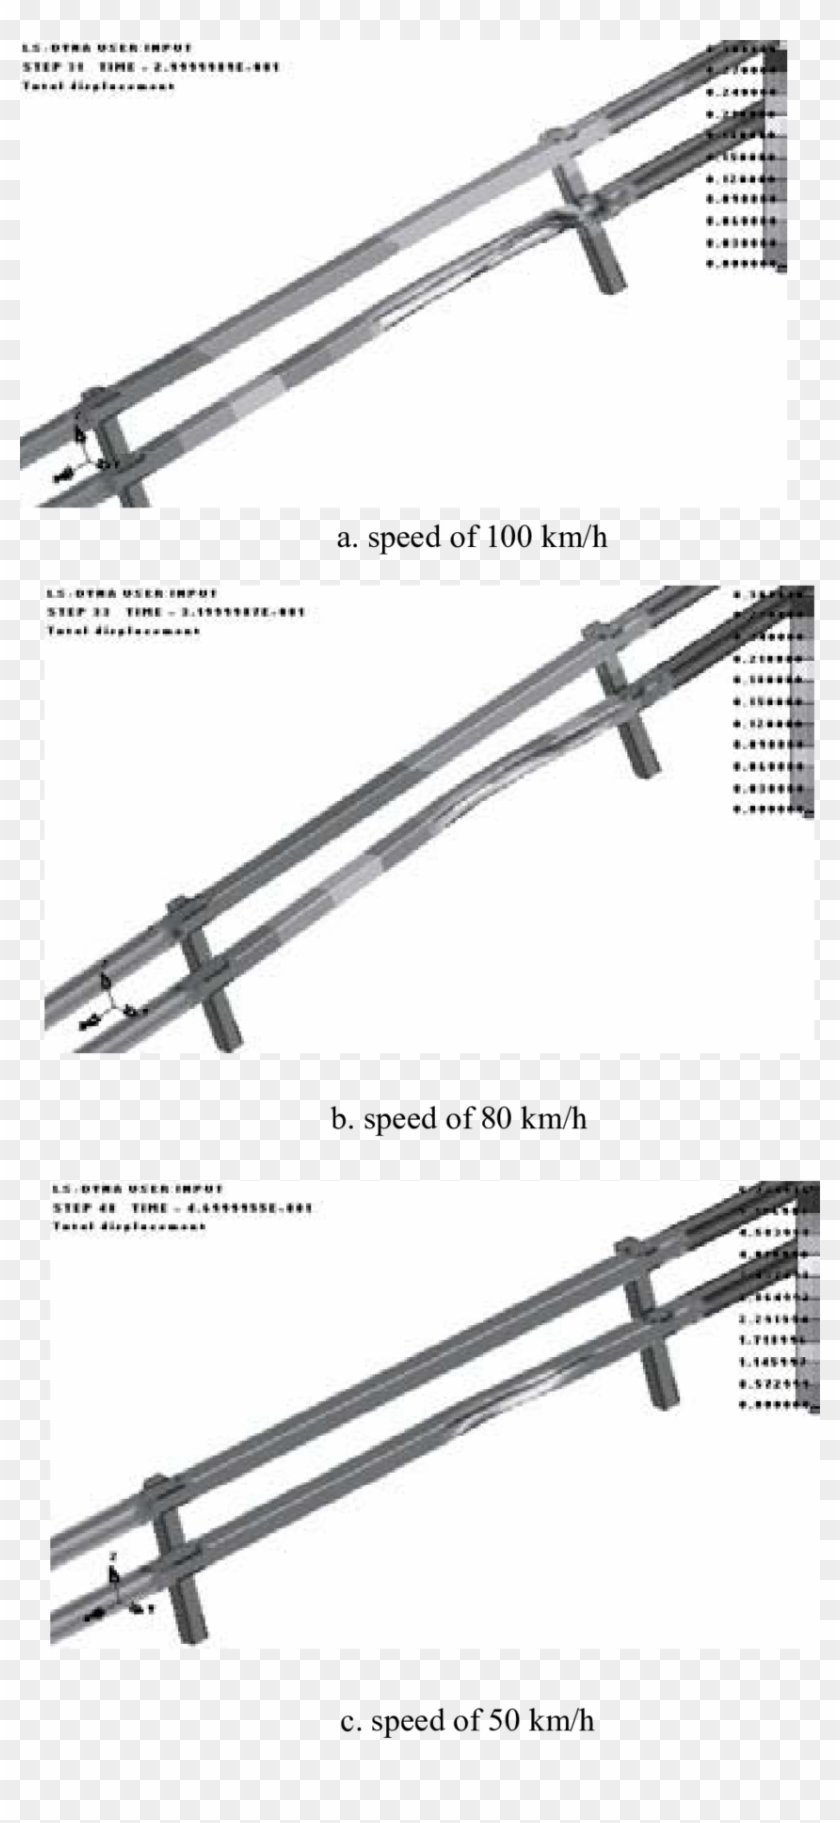 Deformed Shape Of The Guardrail After The Car Impacts - Sword Clipart #4017501